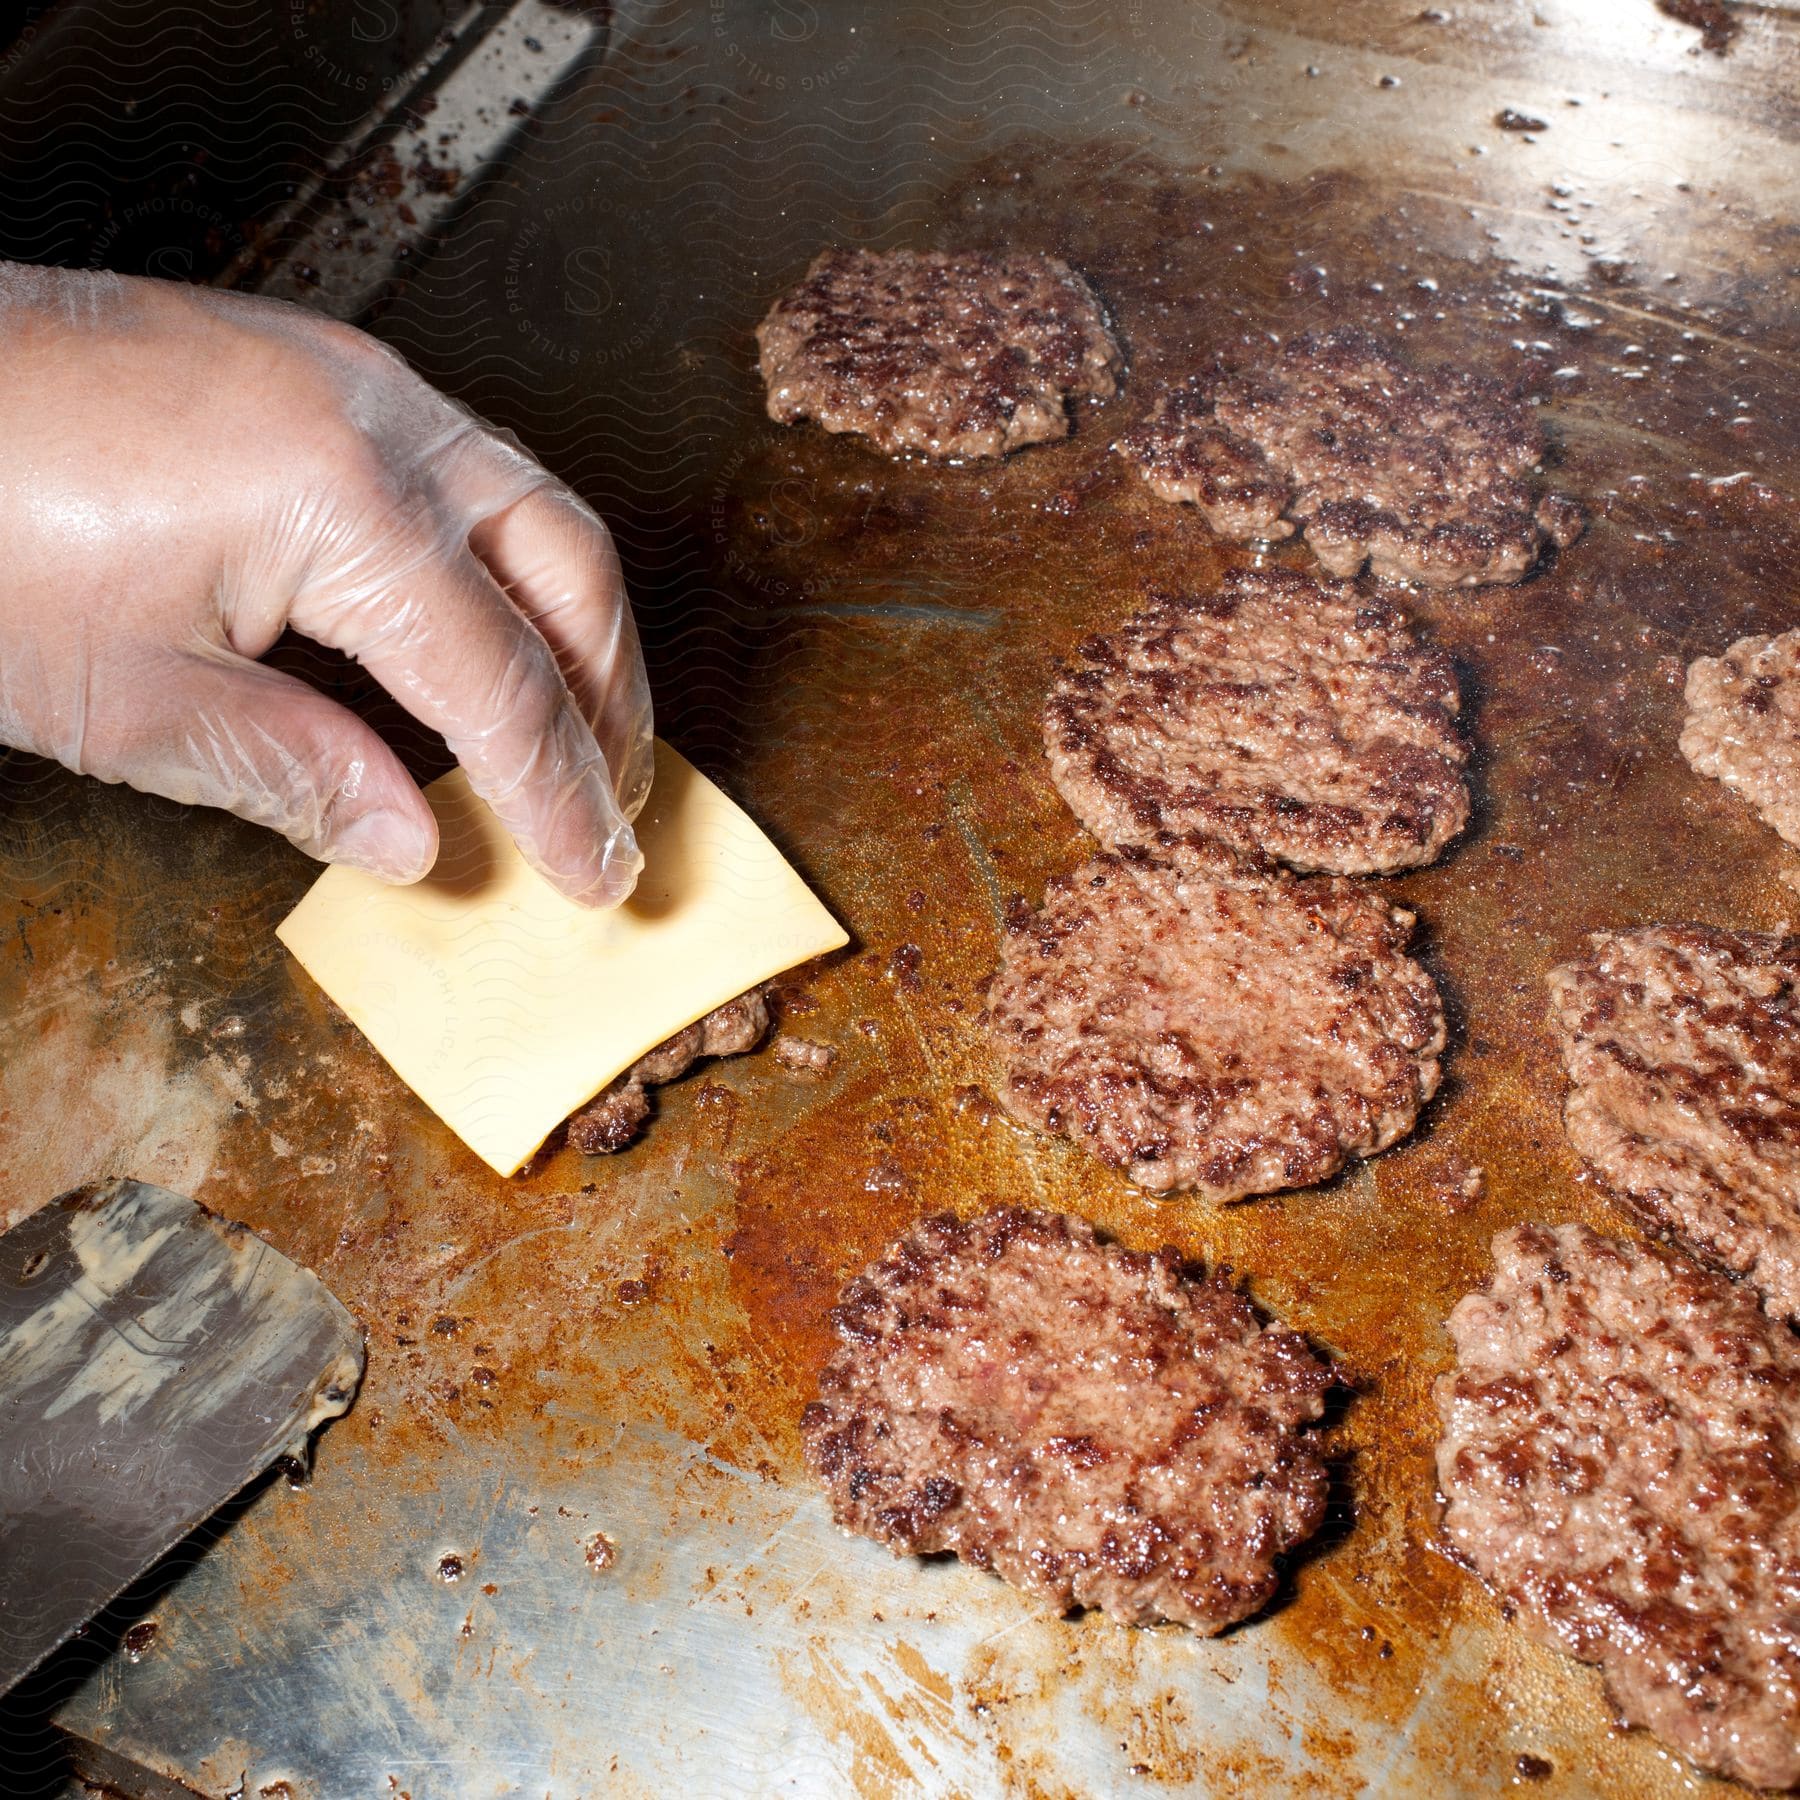 A chef adds a slice of cheese to a cooking burger on a commercial stove surrounded by other burgers